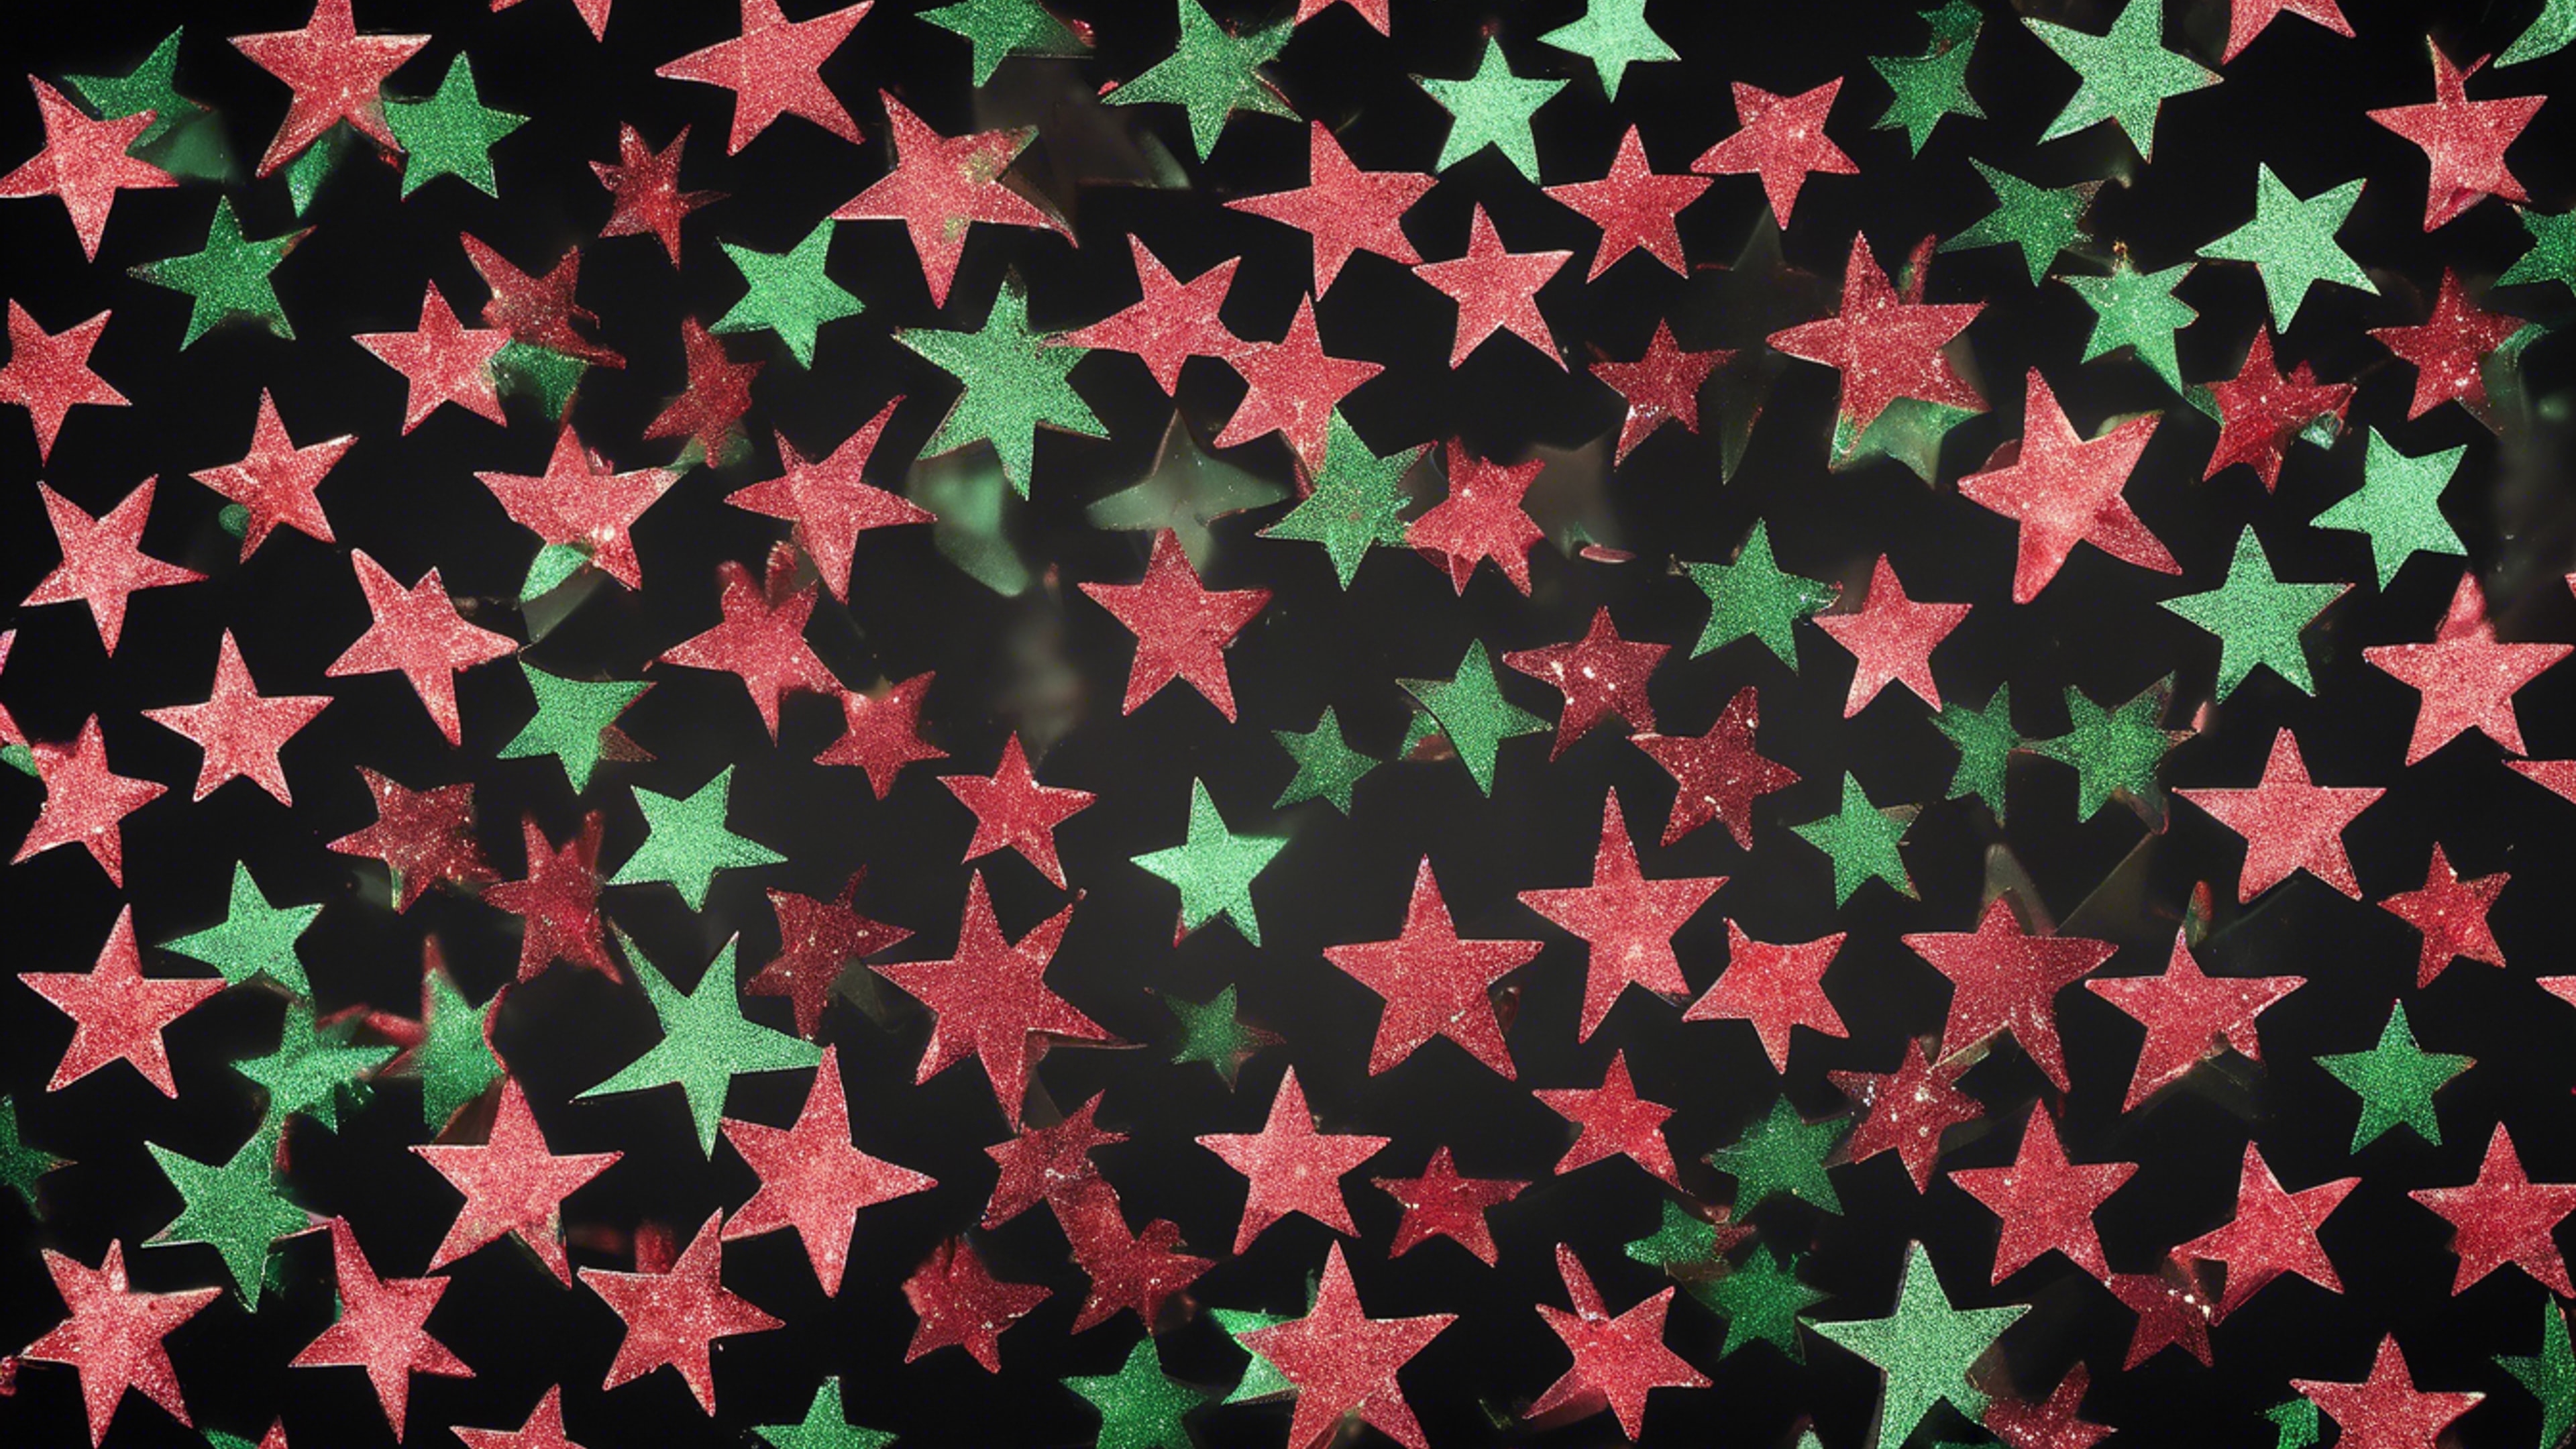 Green and red glitter forming star shapes on a black background Tapeta[2fe752b5dc5f4f35ba35]